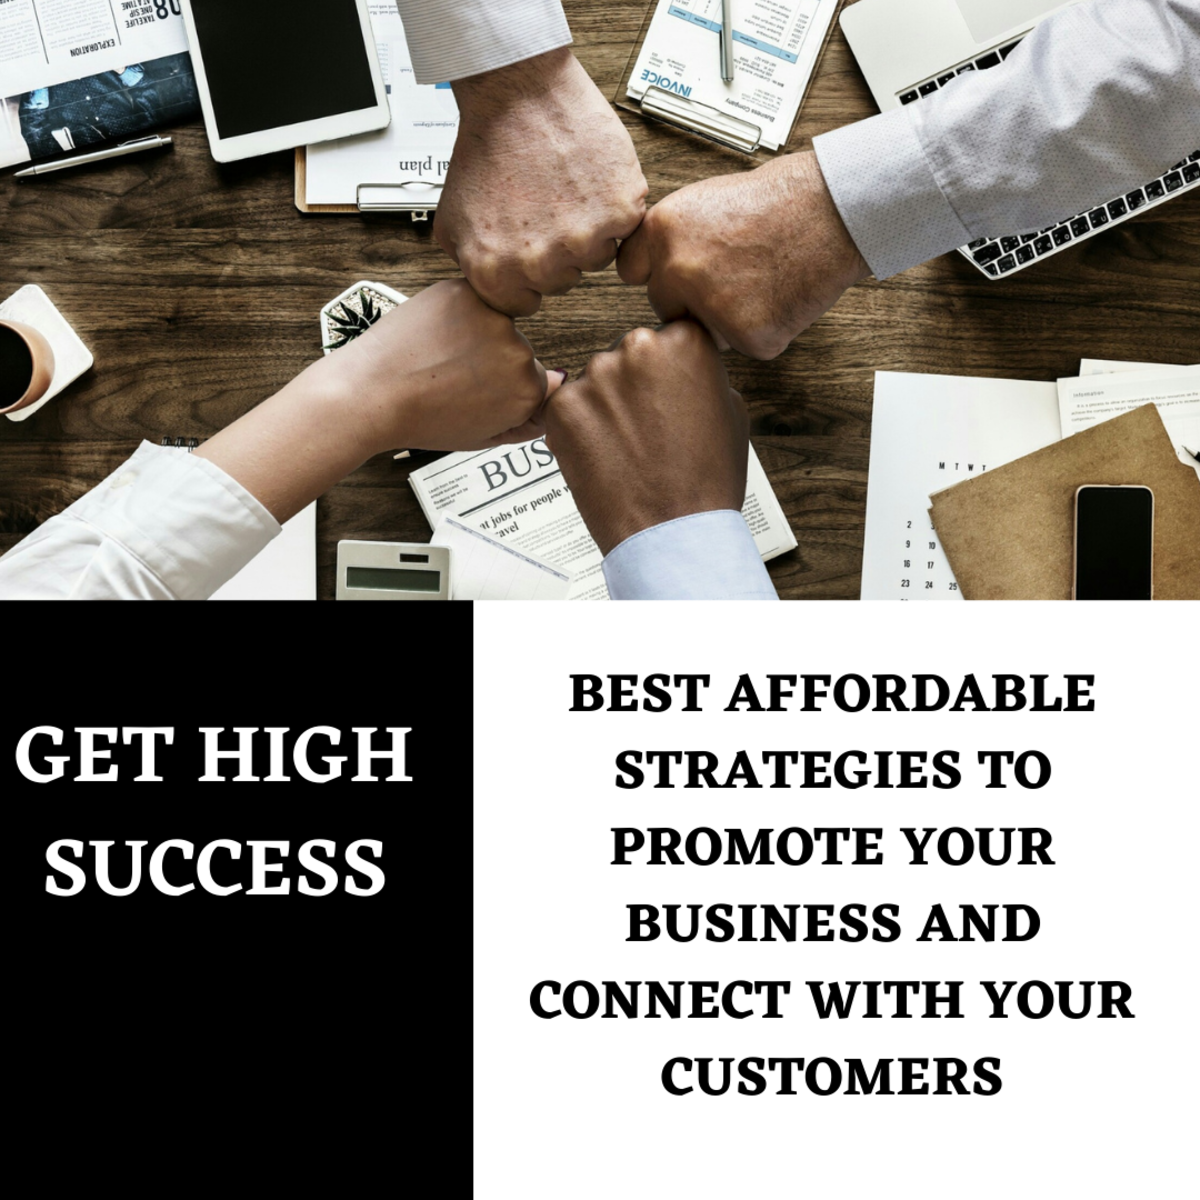 Best Affordable Strategies to Promote Your Business and Connect With Your Customers